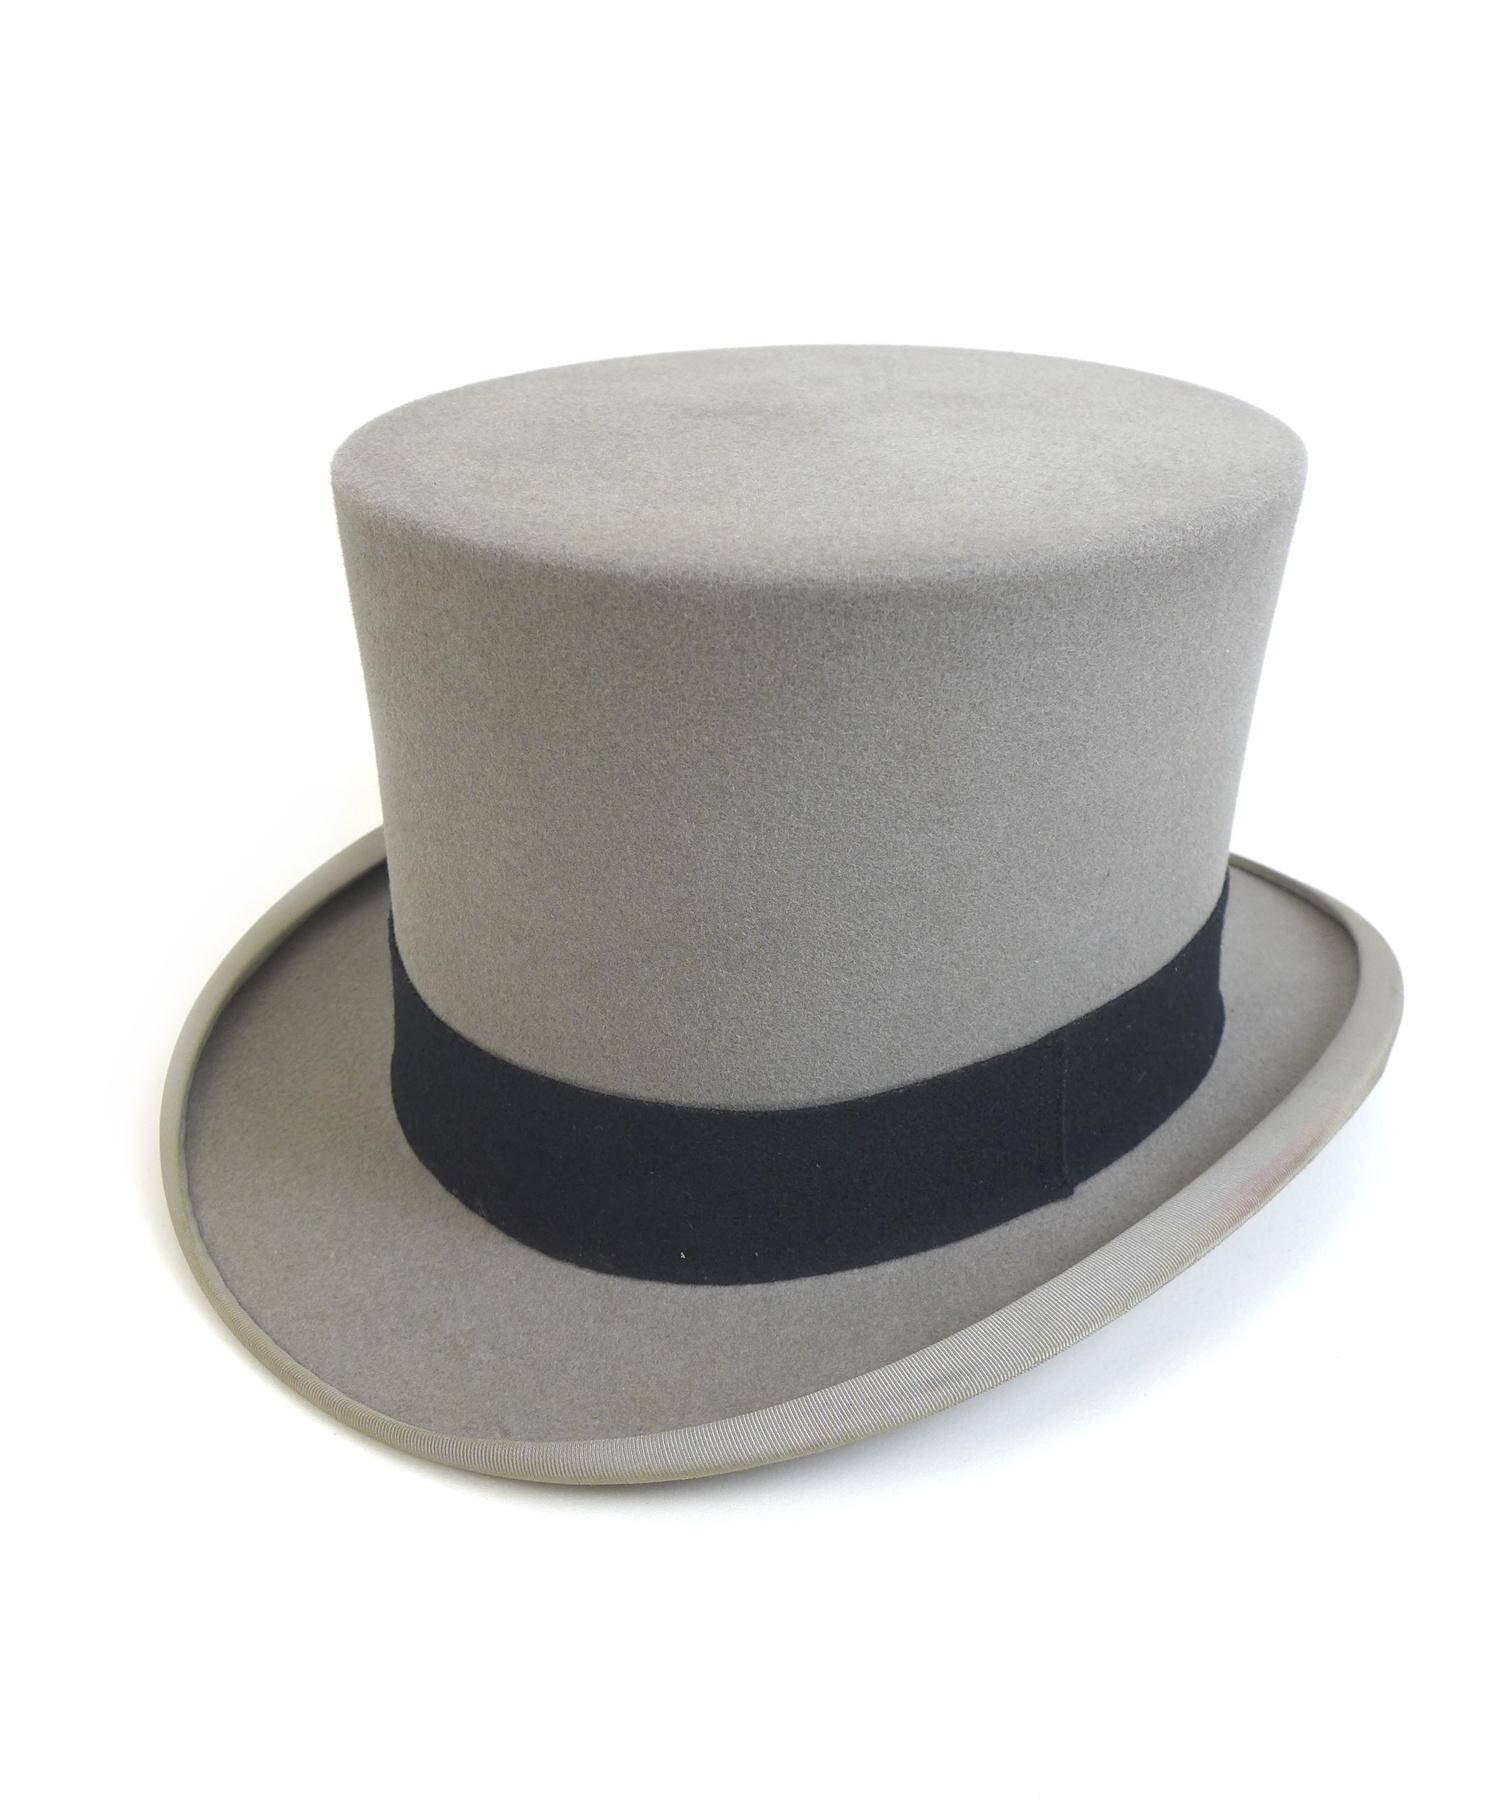 Two vintage grey felt top hats, comprising two a grey felt top hats, with one by Kirsop of Glasgow - Image 8 of 15